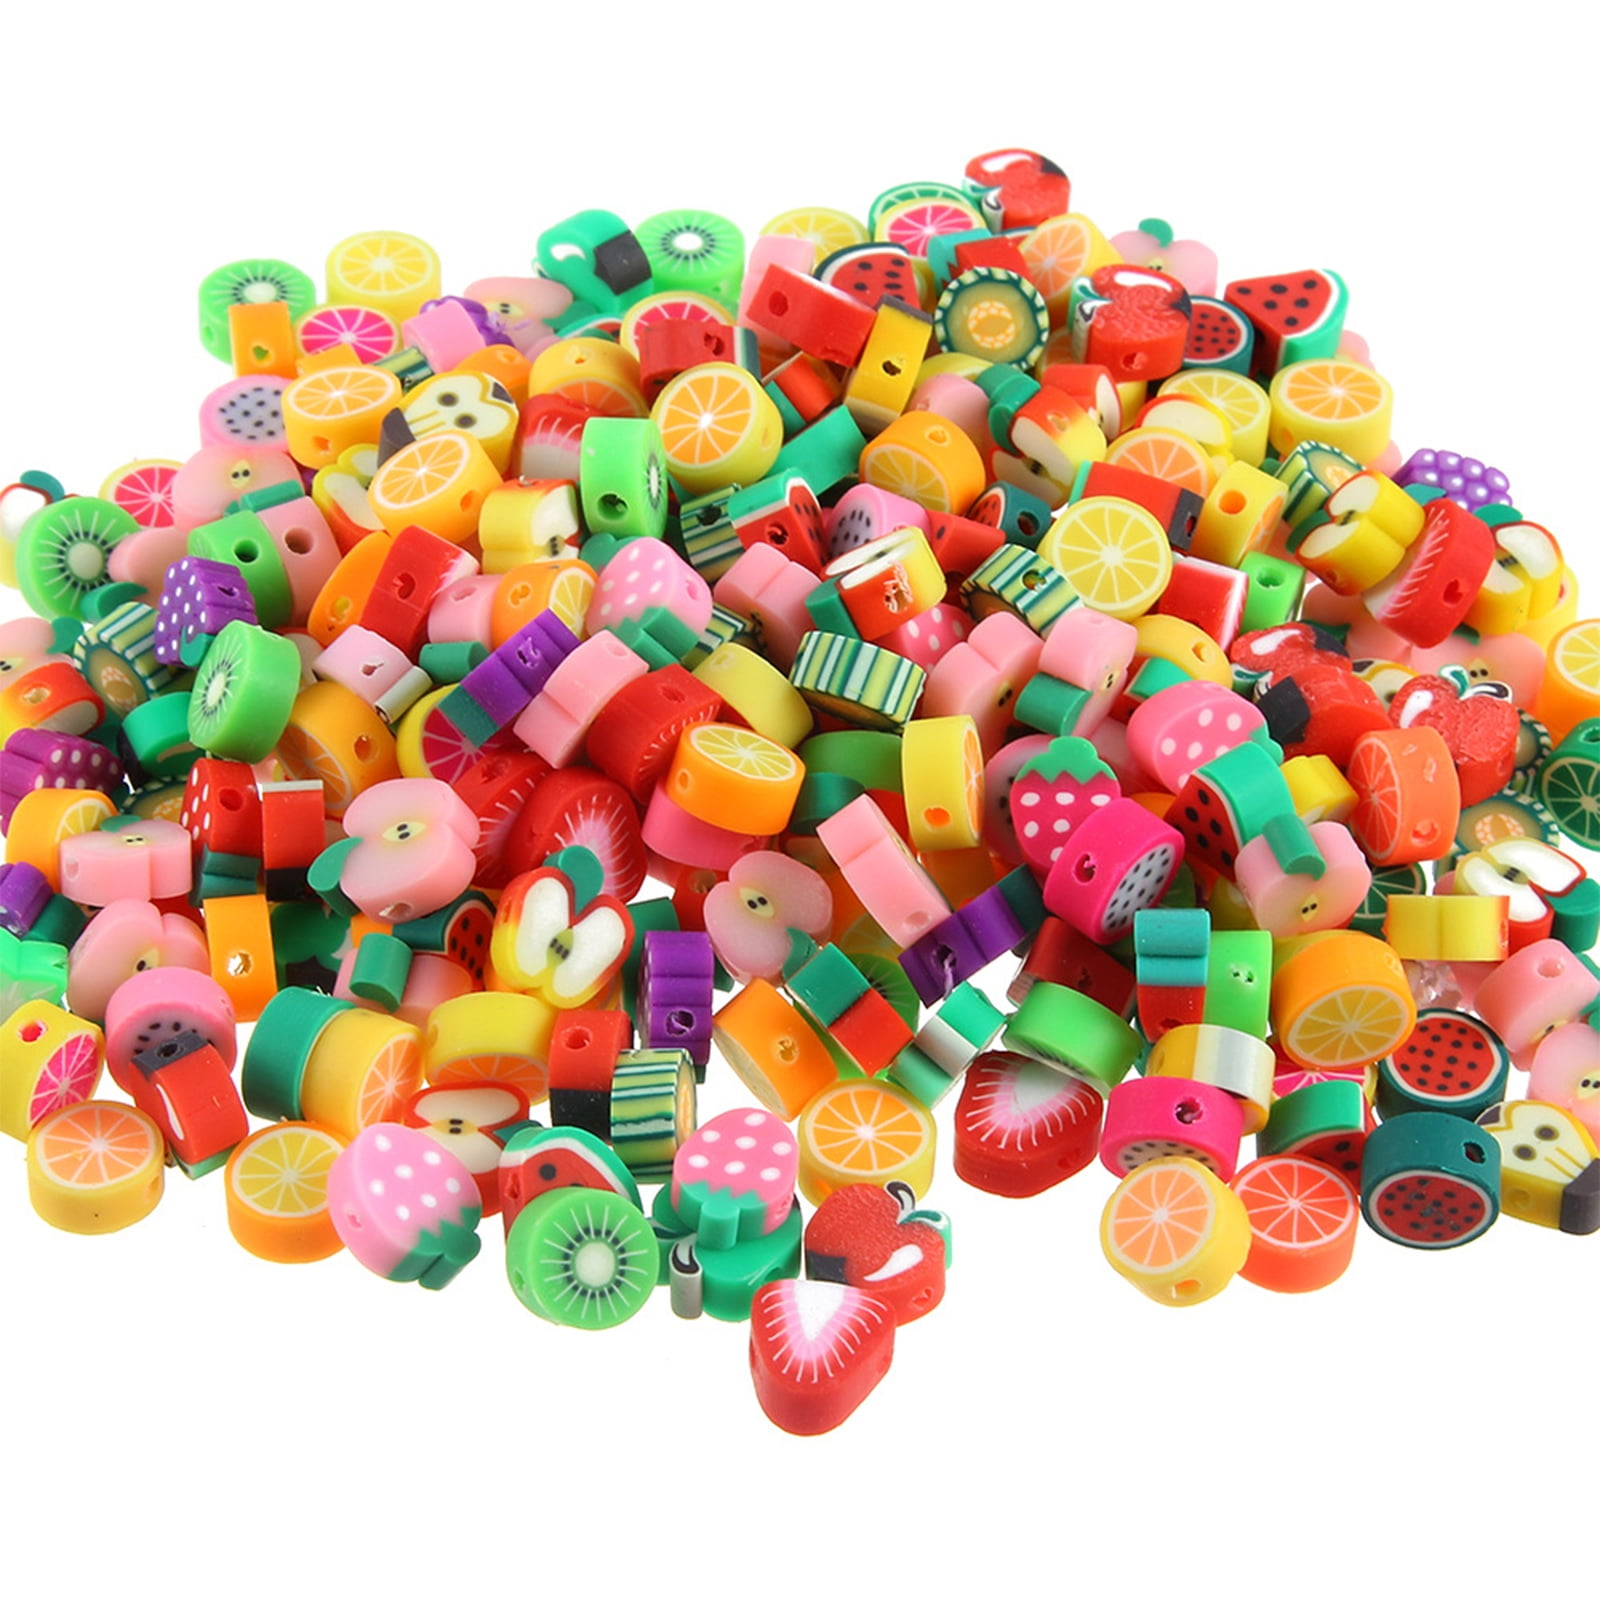 100pcs Mixed Fruit Spacer Beads Color Polymer Clay Beads for DIY Jewelry Making 